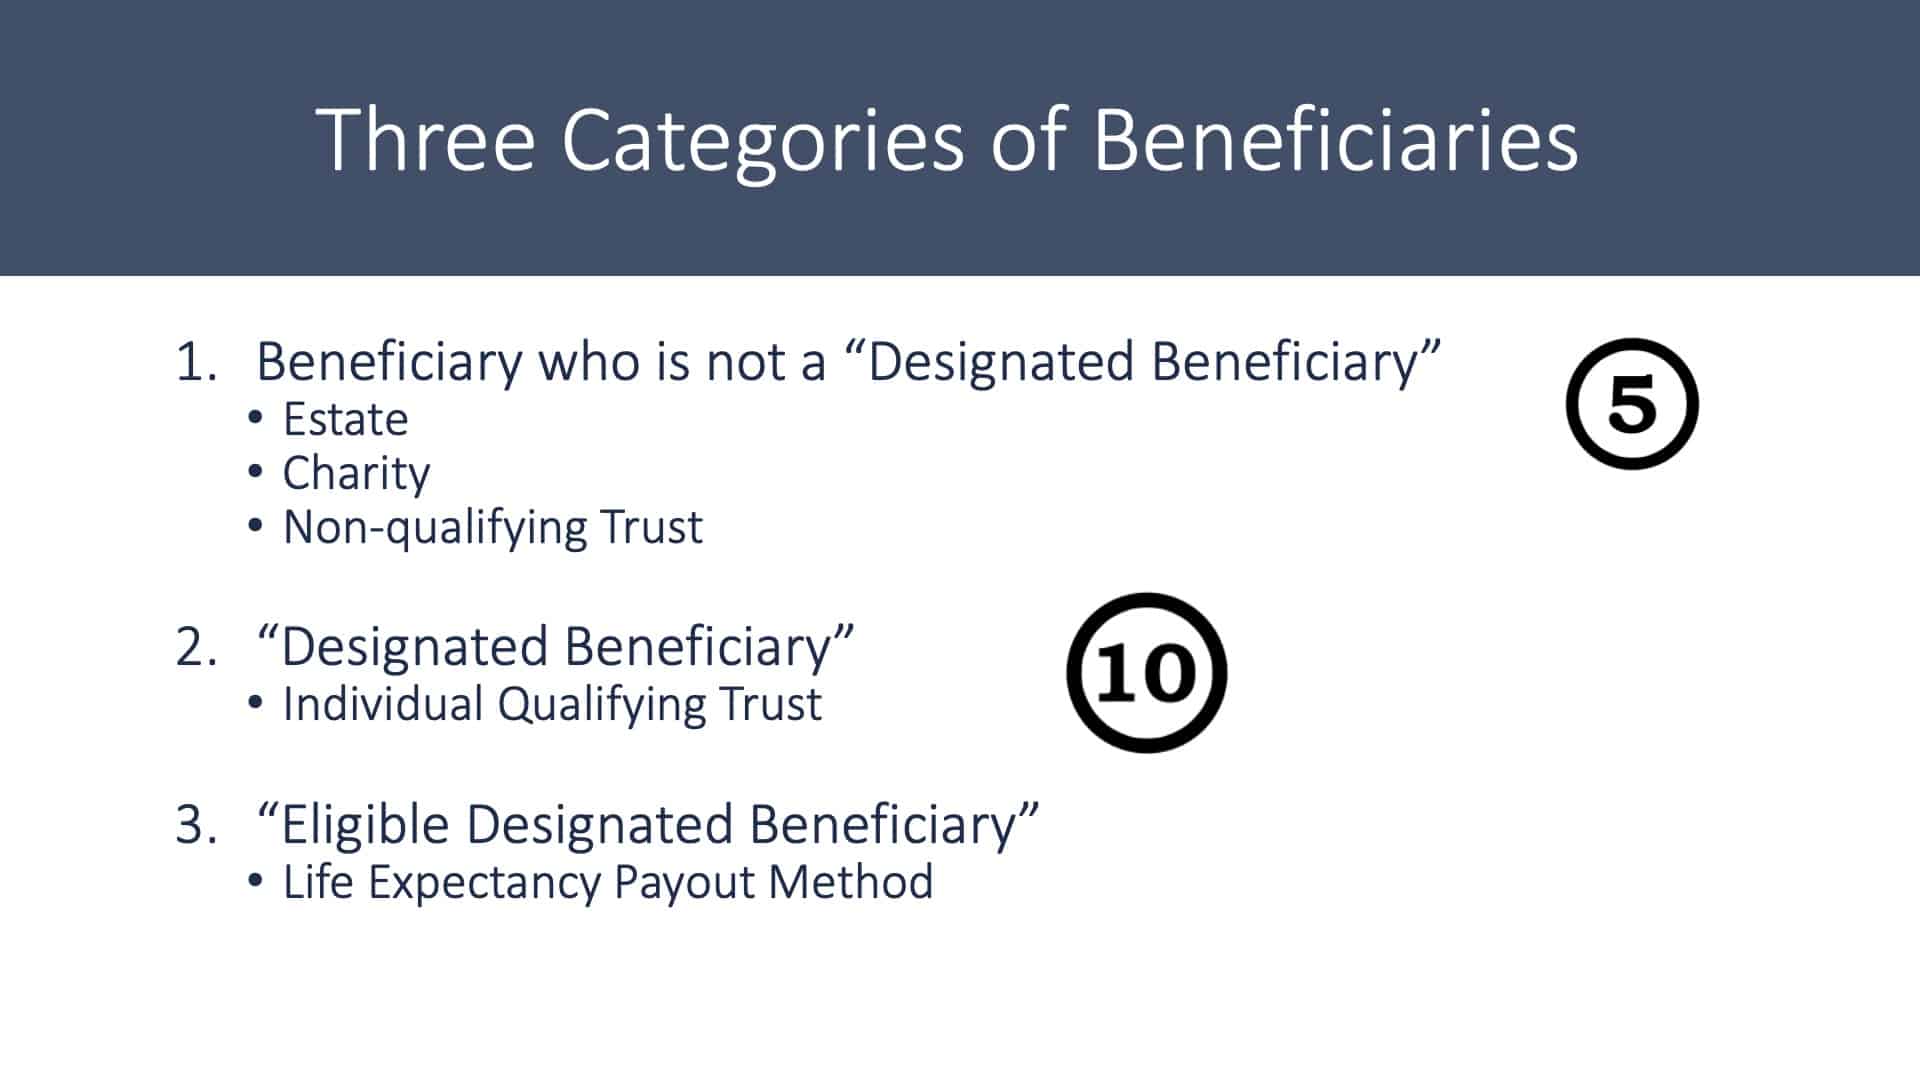 Is a Will Enough? - Three Categories of Beneficiaries